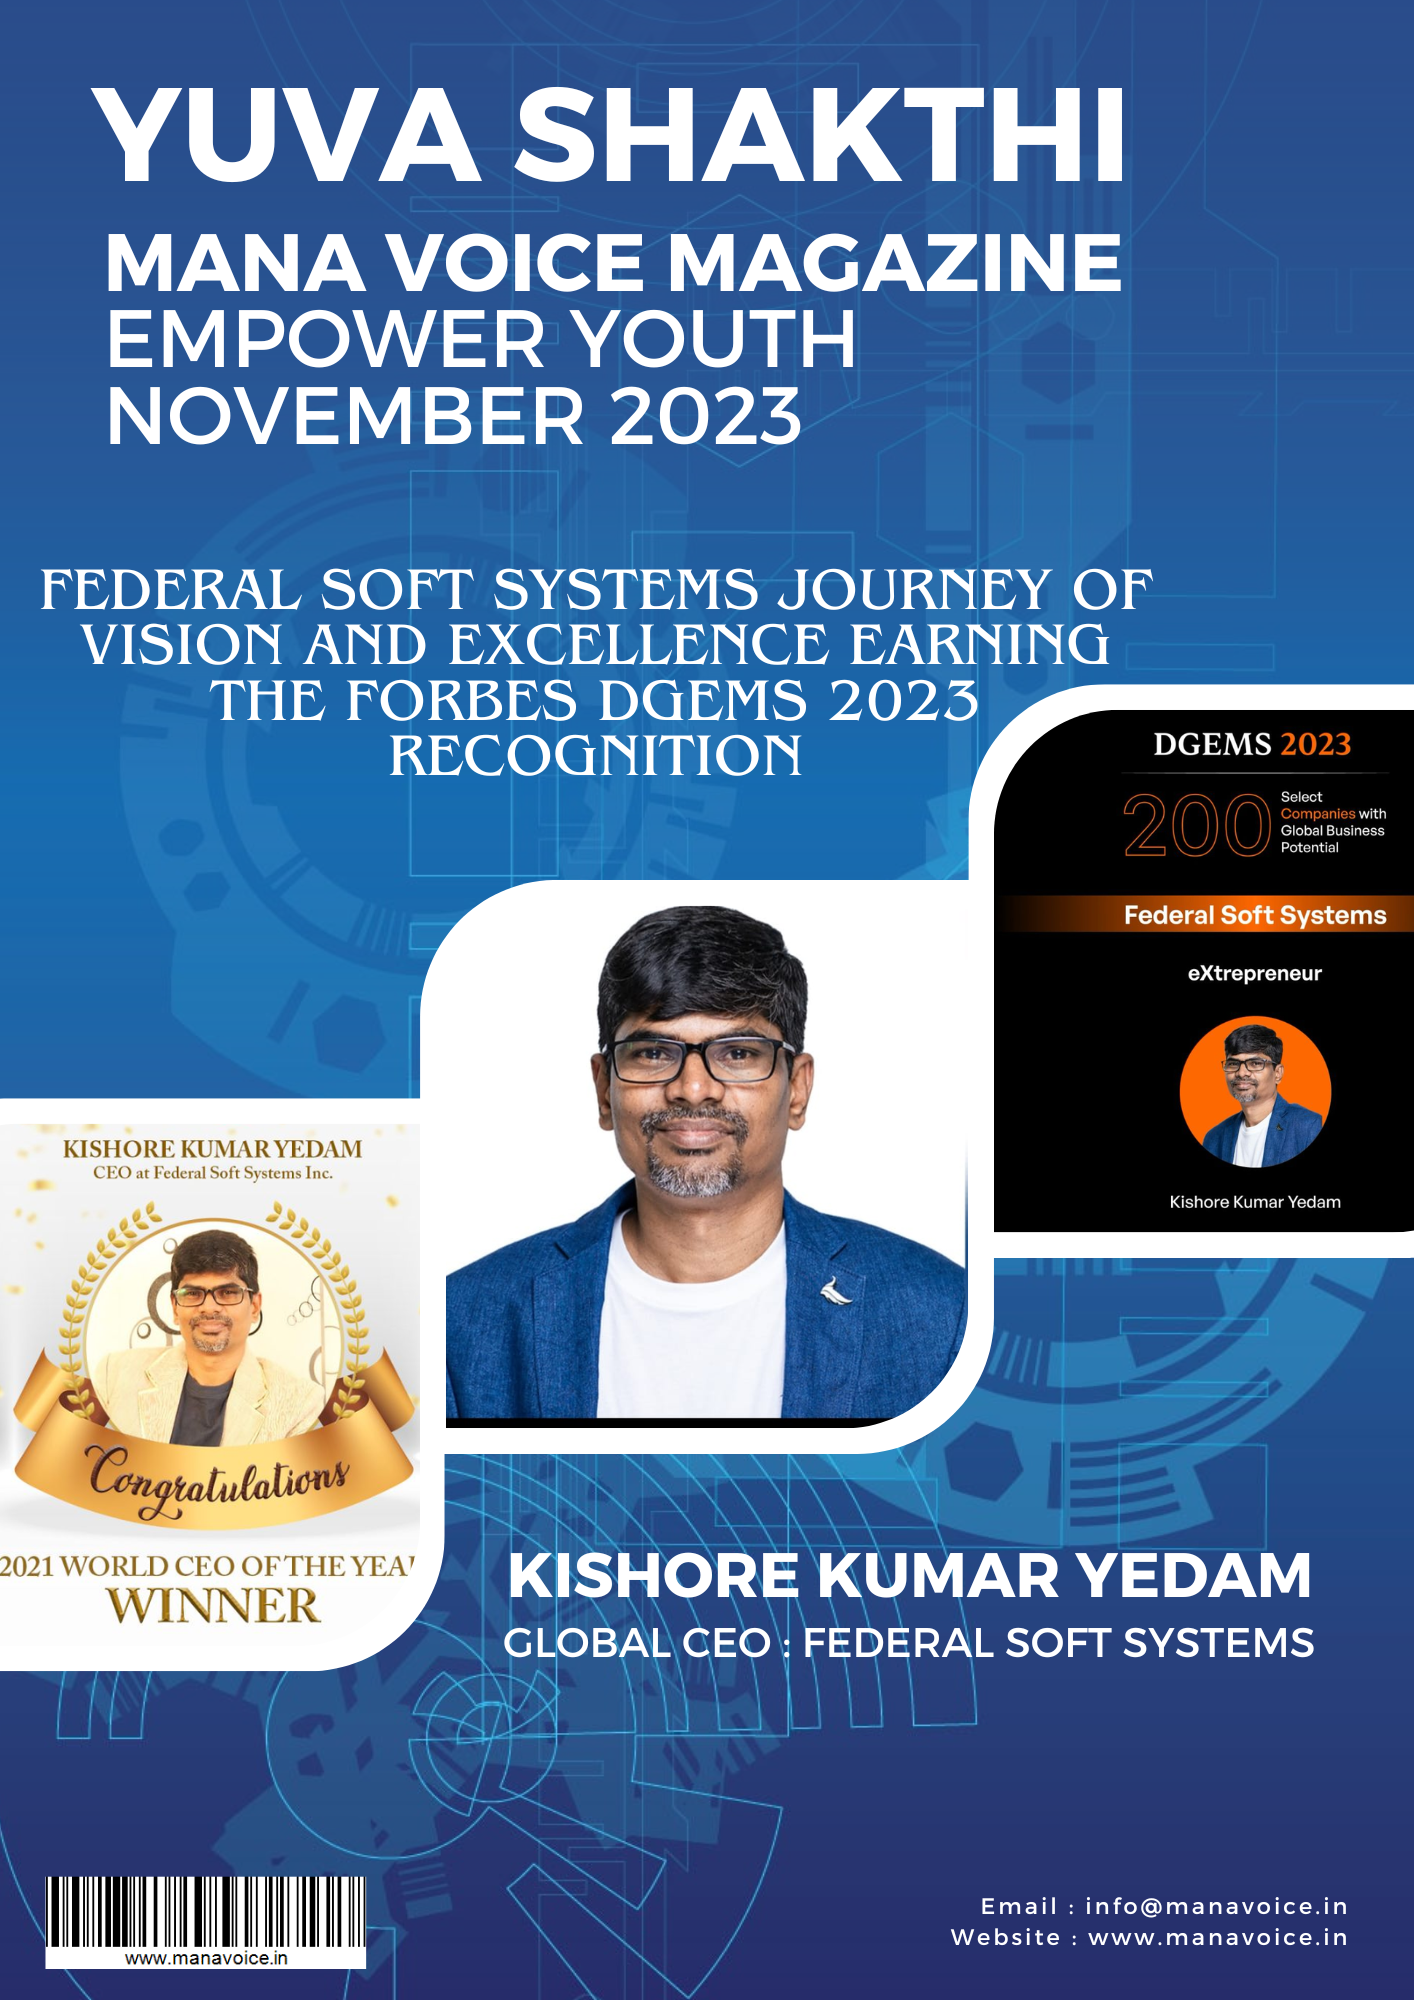  Federal Soft Systems Journey of Vision and Excellence Earning the Forbes DGEMS 2023 Recognition | YUVA SHAKTHI | EMPOWER YOUTH | MANA VOICE GLOBAL MEDIA